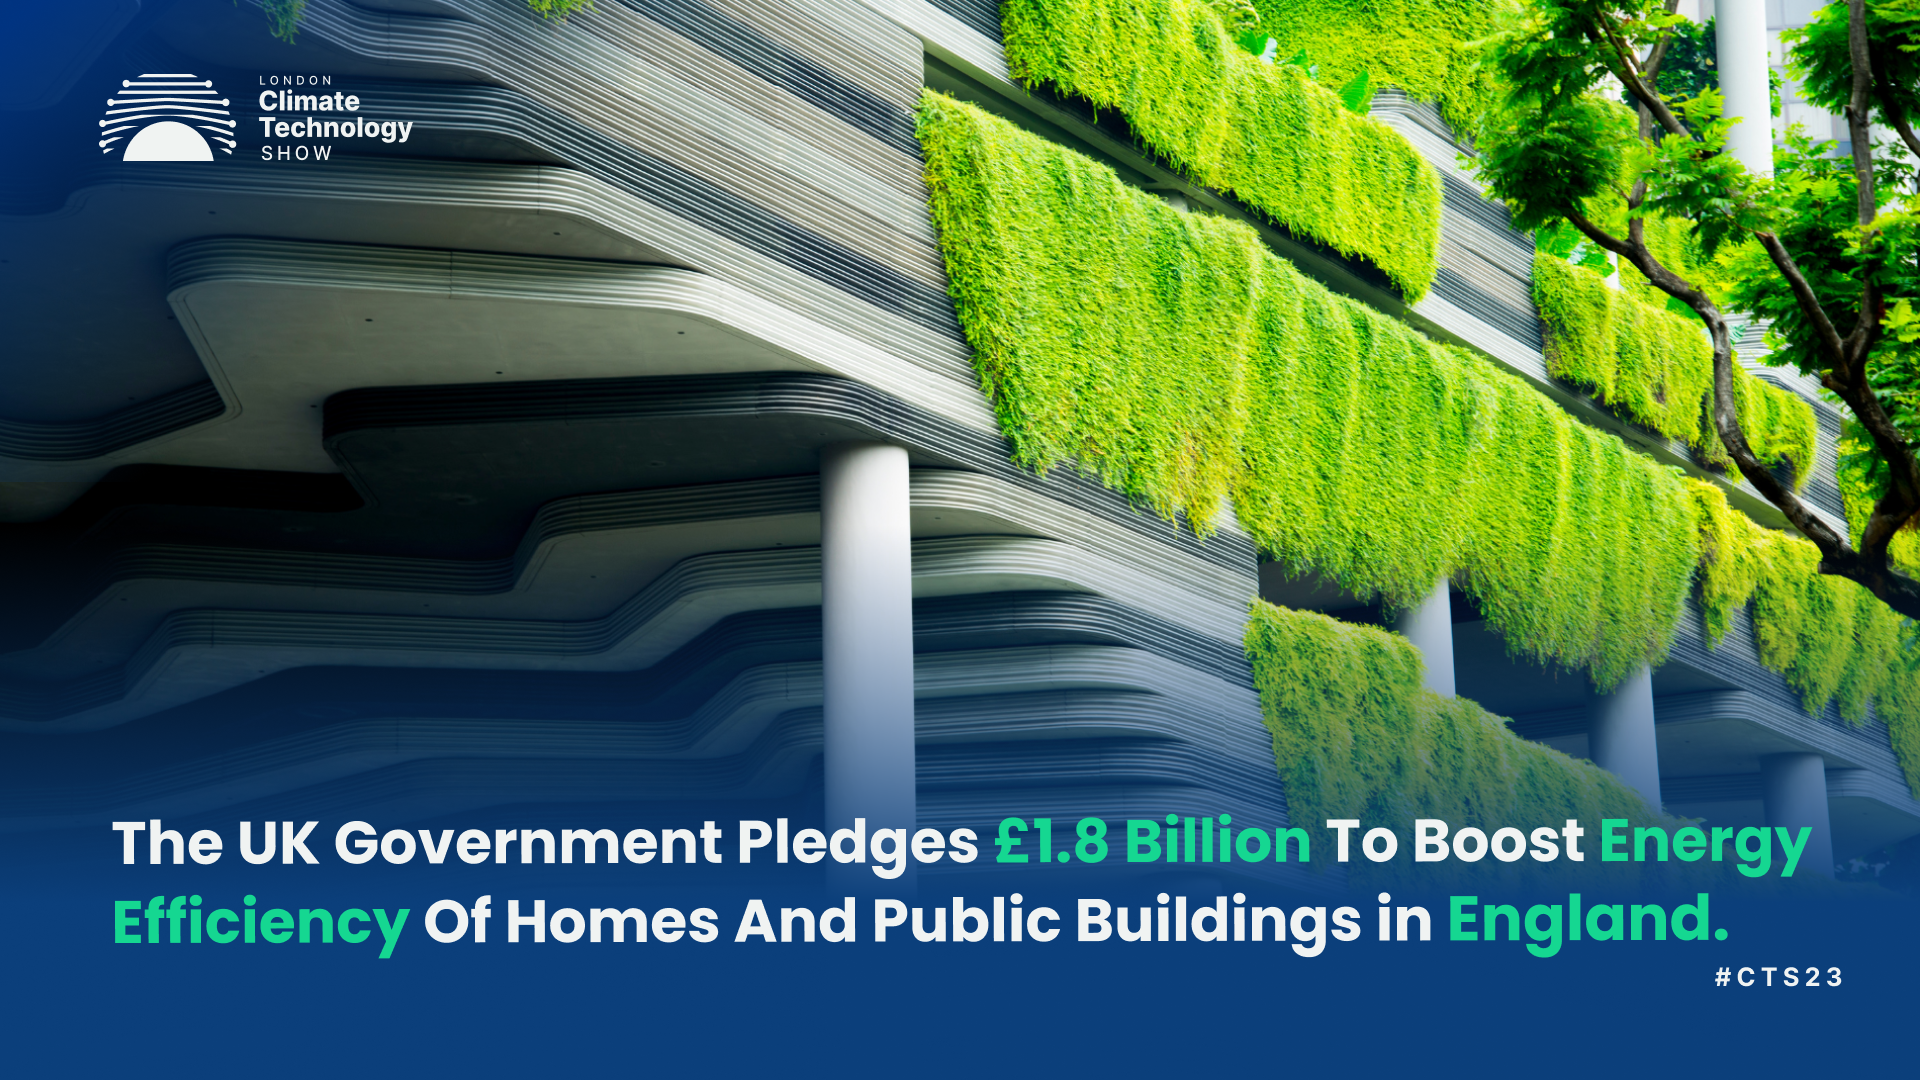 The UK Government Pledges £1.8 Billion To Boost Energy Efficiency Of Homes And Public Buildings in England.